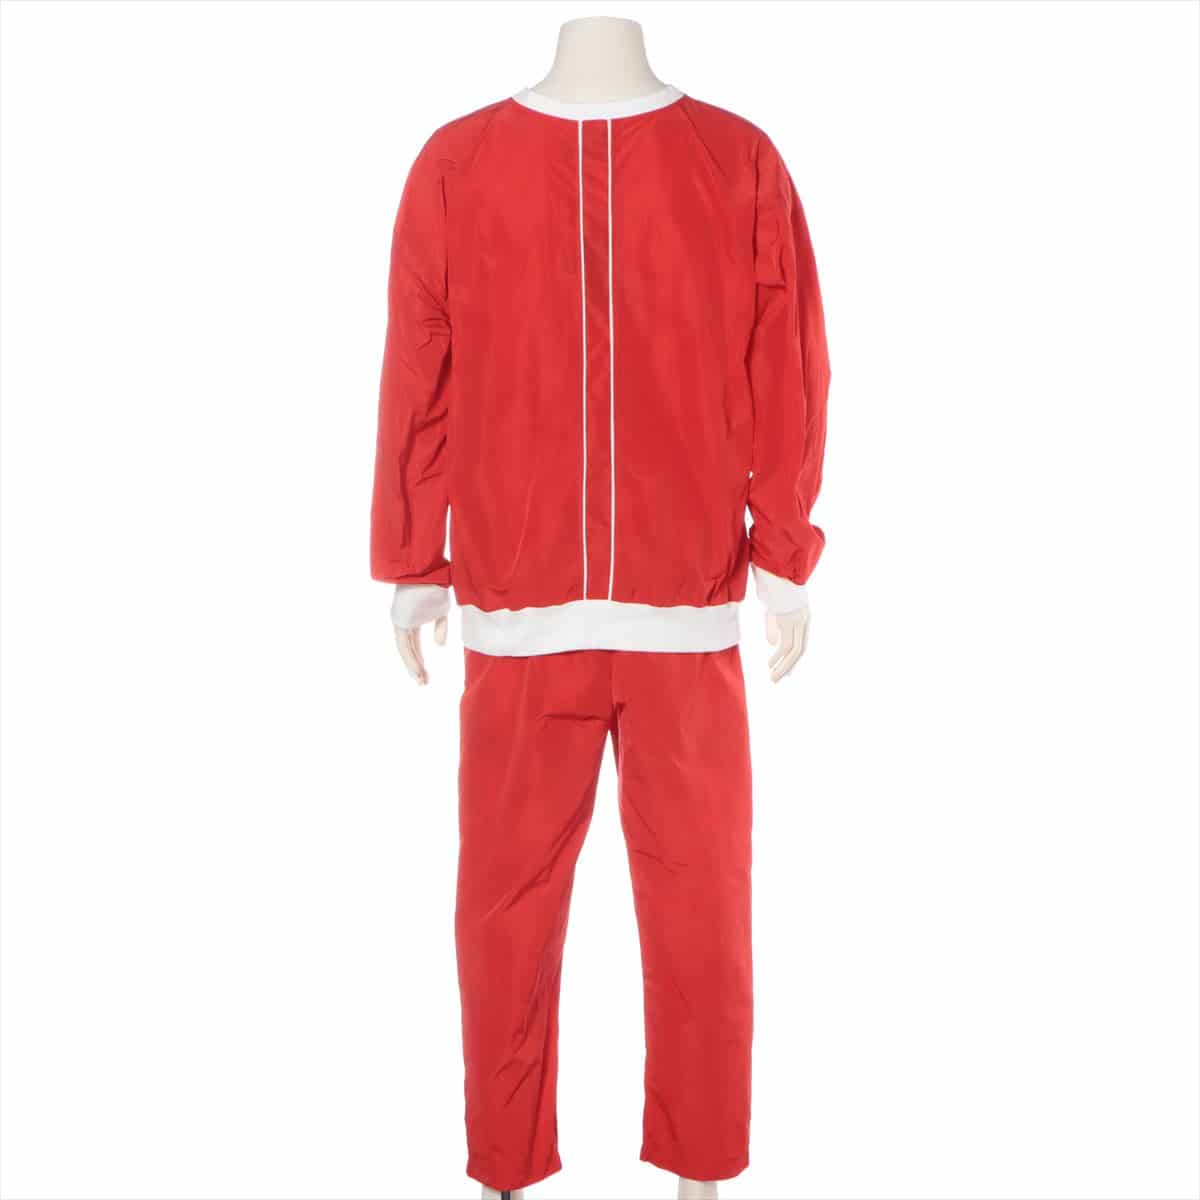 Shoup Polyester Sweatsuit M Men's Red  Setup